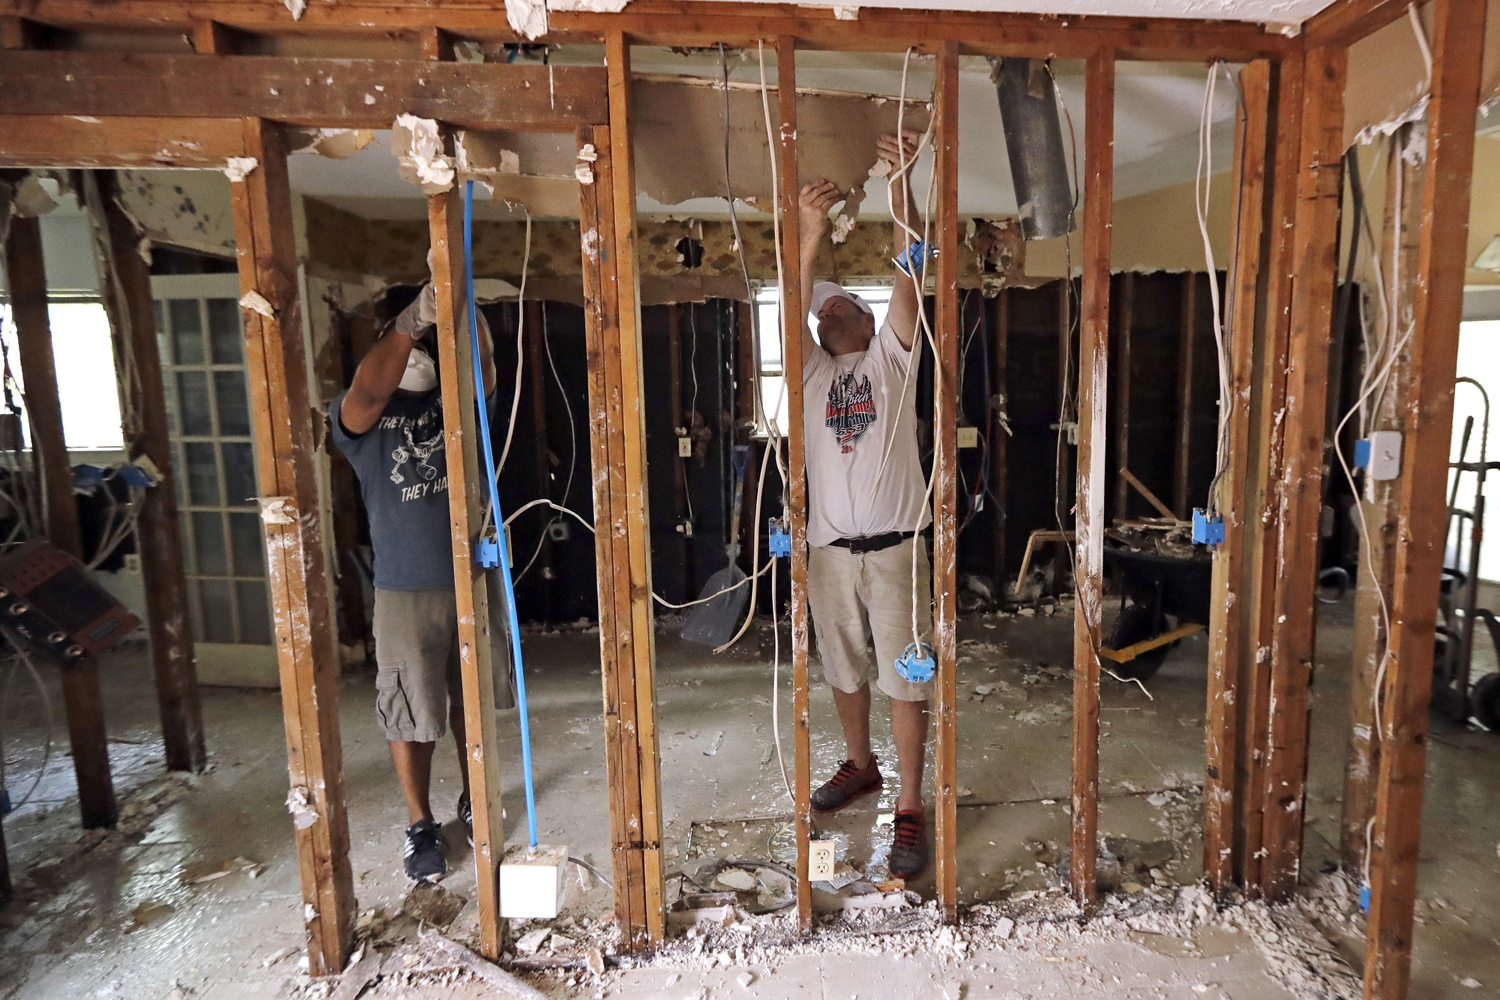 Volunteers Jason Luck, right, and Ryan Colaco remove drywall from a home destroyed by floodwaters in the aftermath of Hurricane Harvey in Spring, Texas. (David J. Phillip/AP)